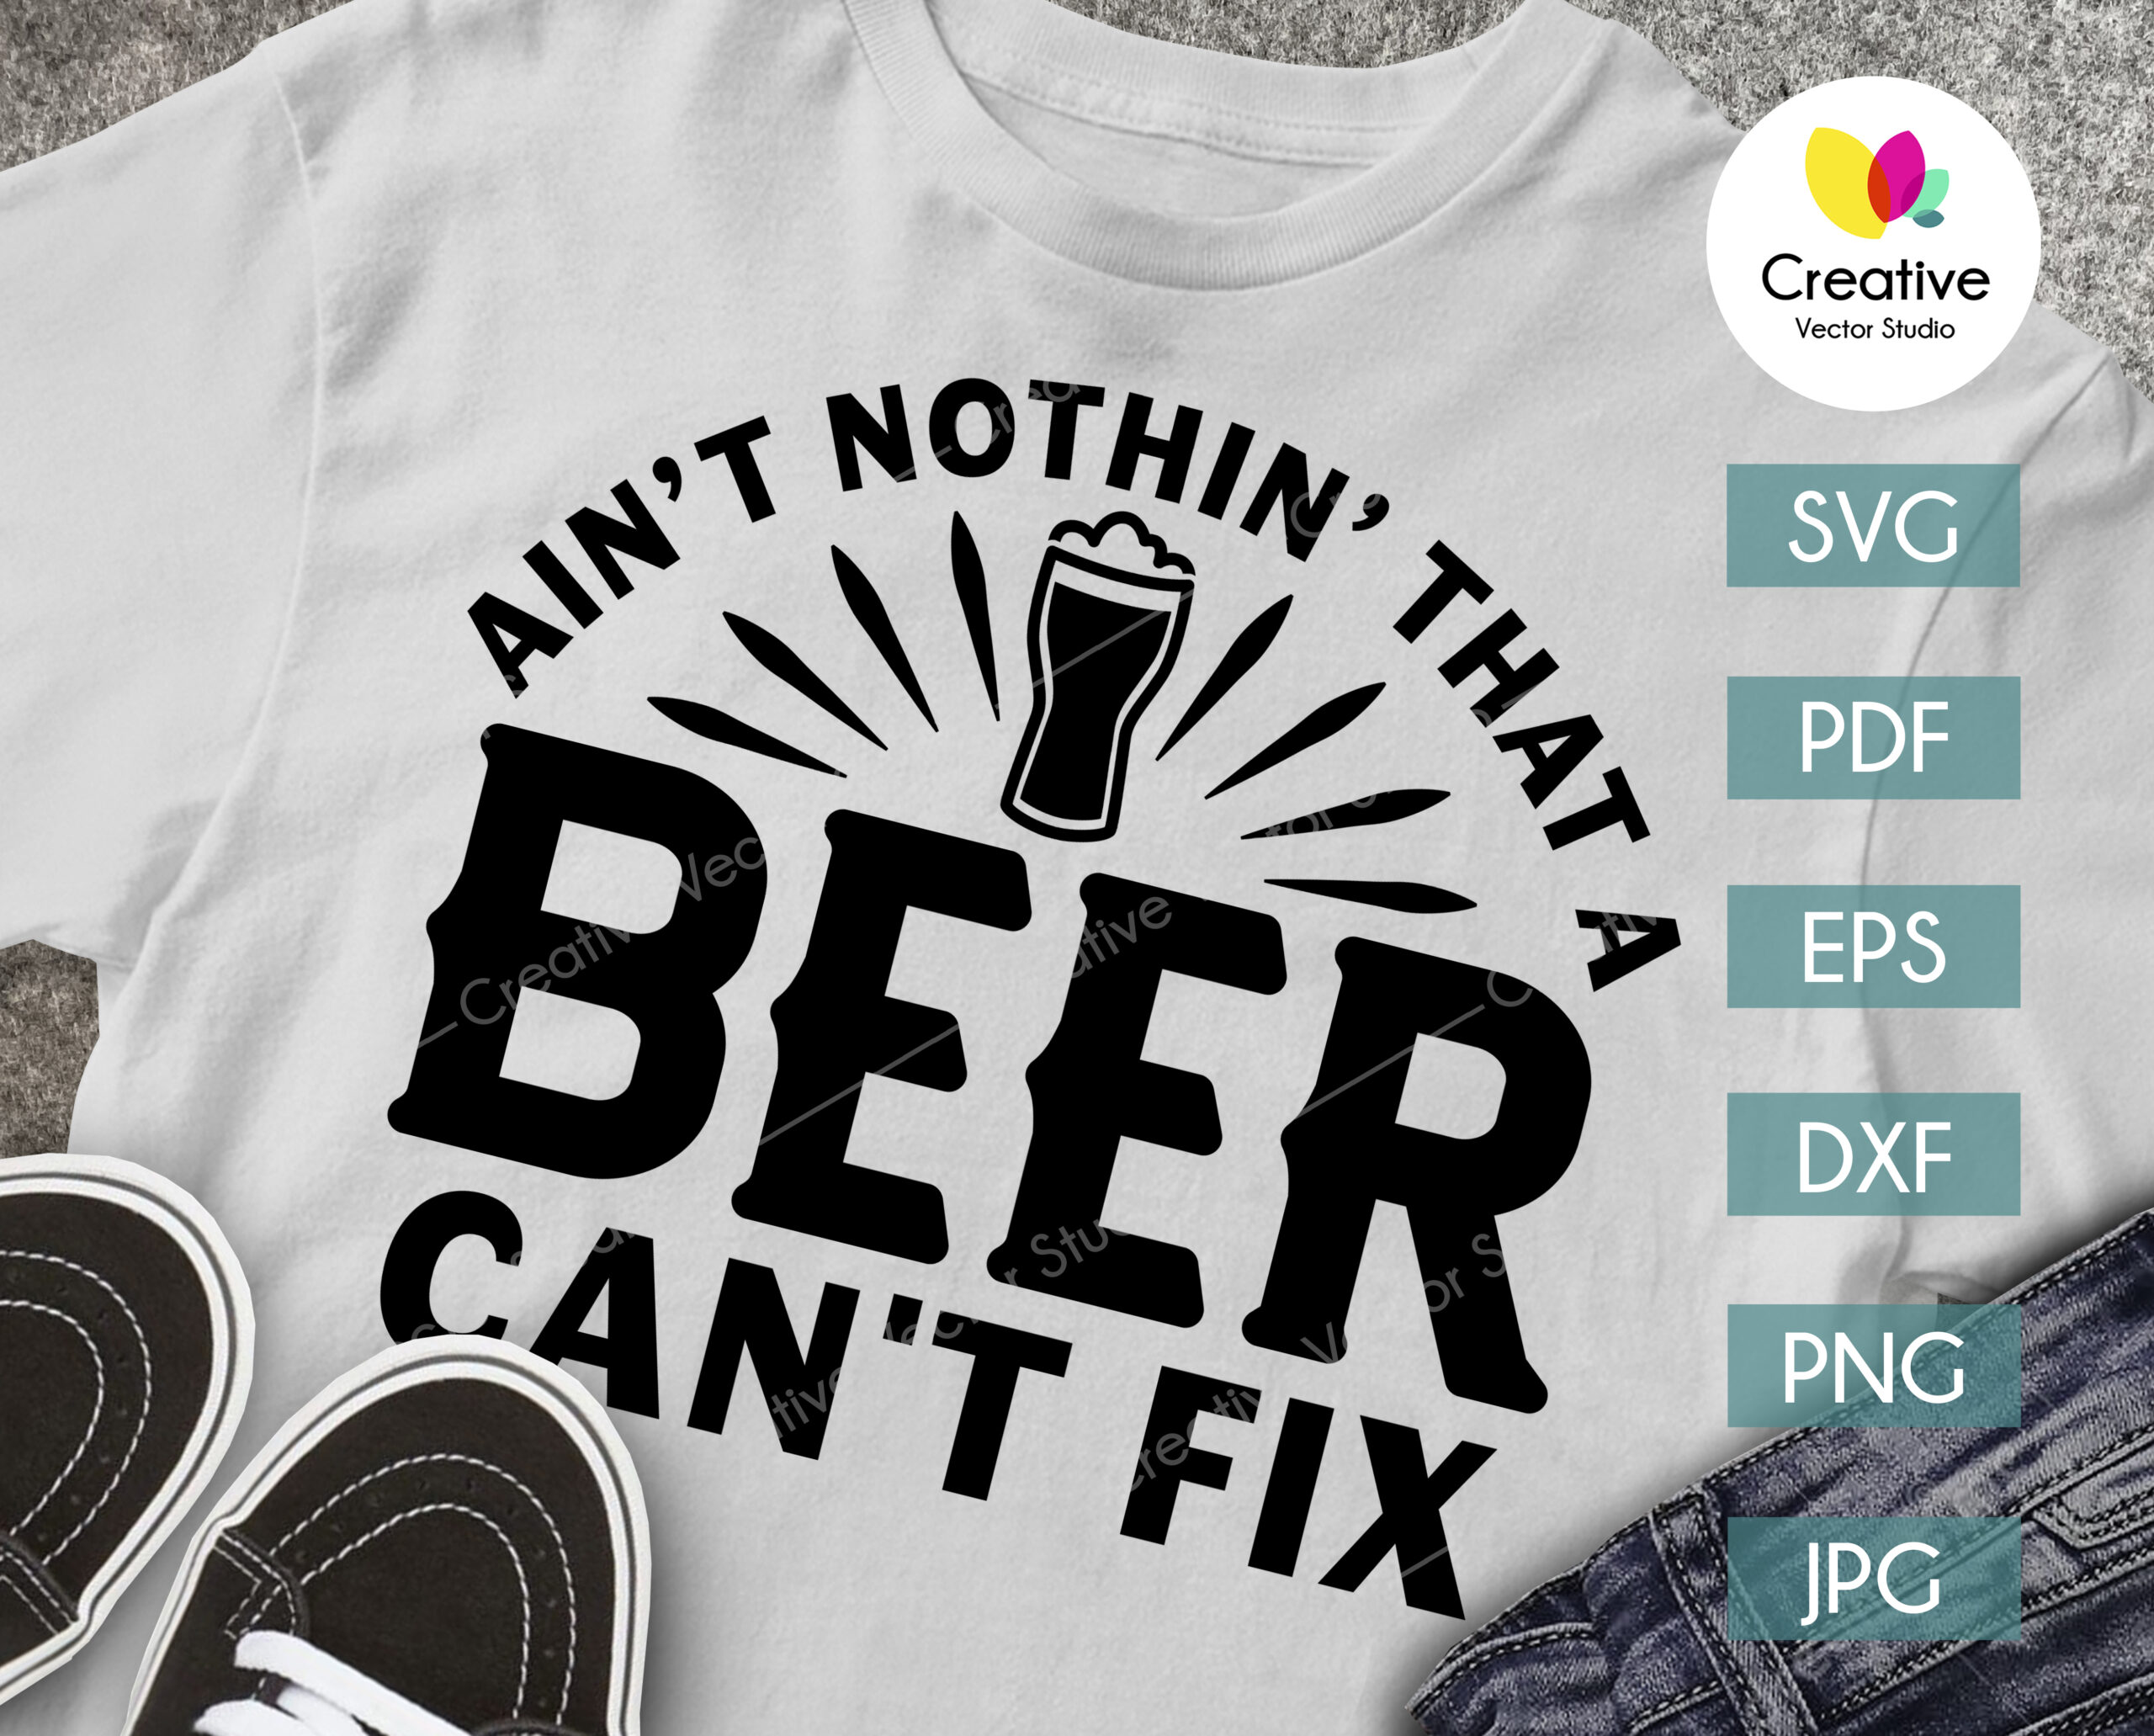 Download Ain T Nothing That A Beer San T Fix Svg Creative Vector Studio